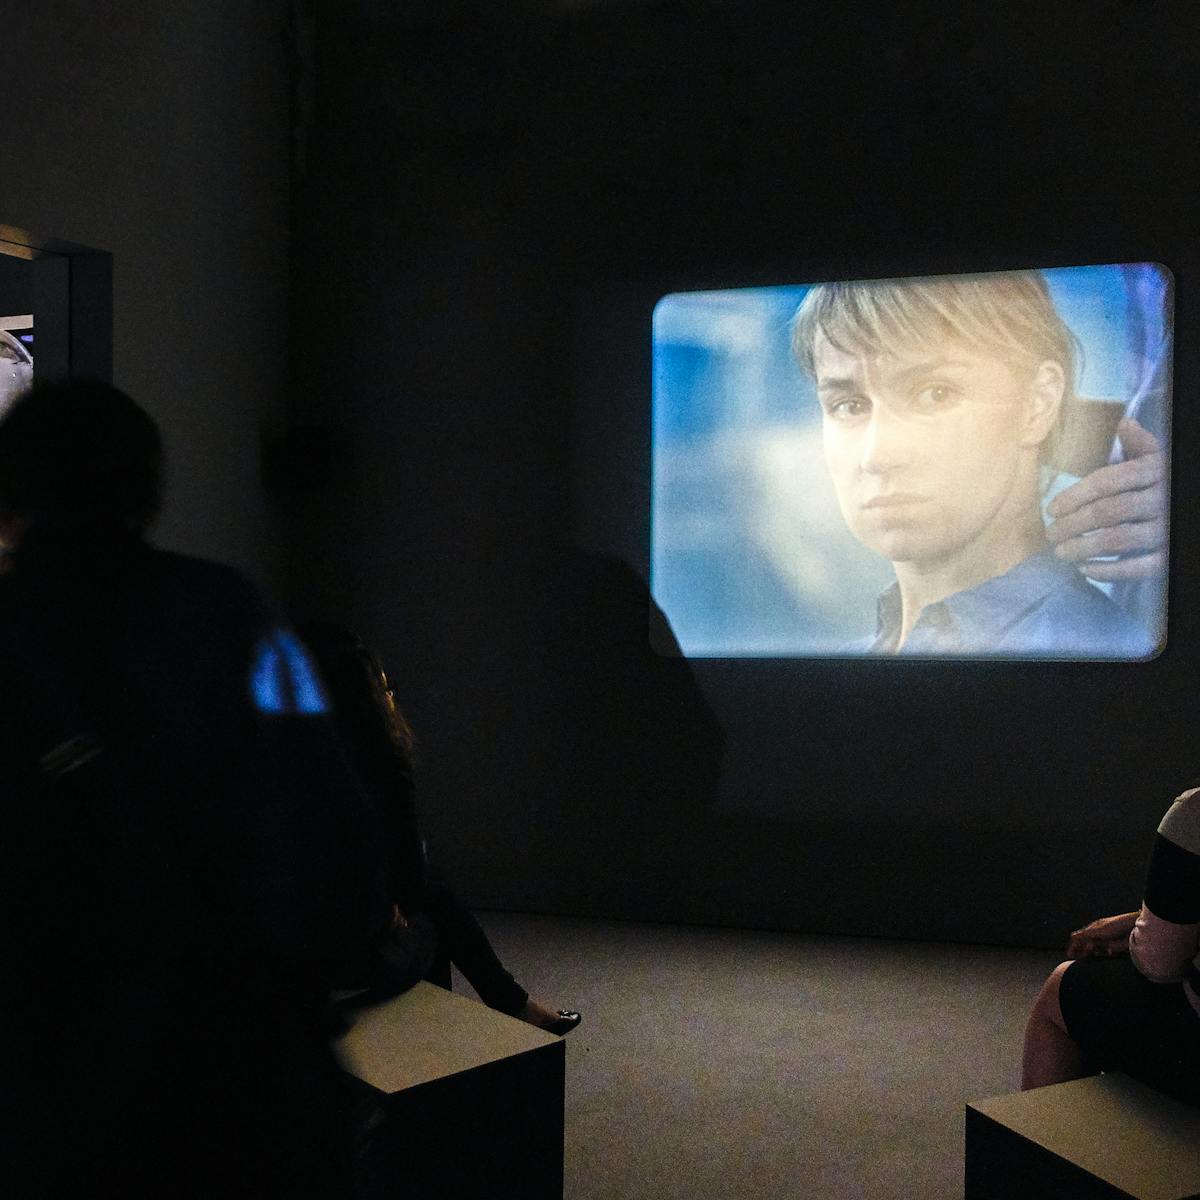 Photograph of film projection showing a woman's face, within a dark gallery setting. In the foreground are visitors sitting on benches watching the film.